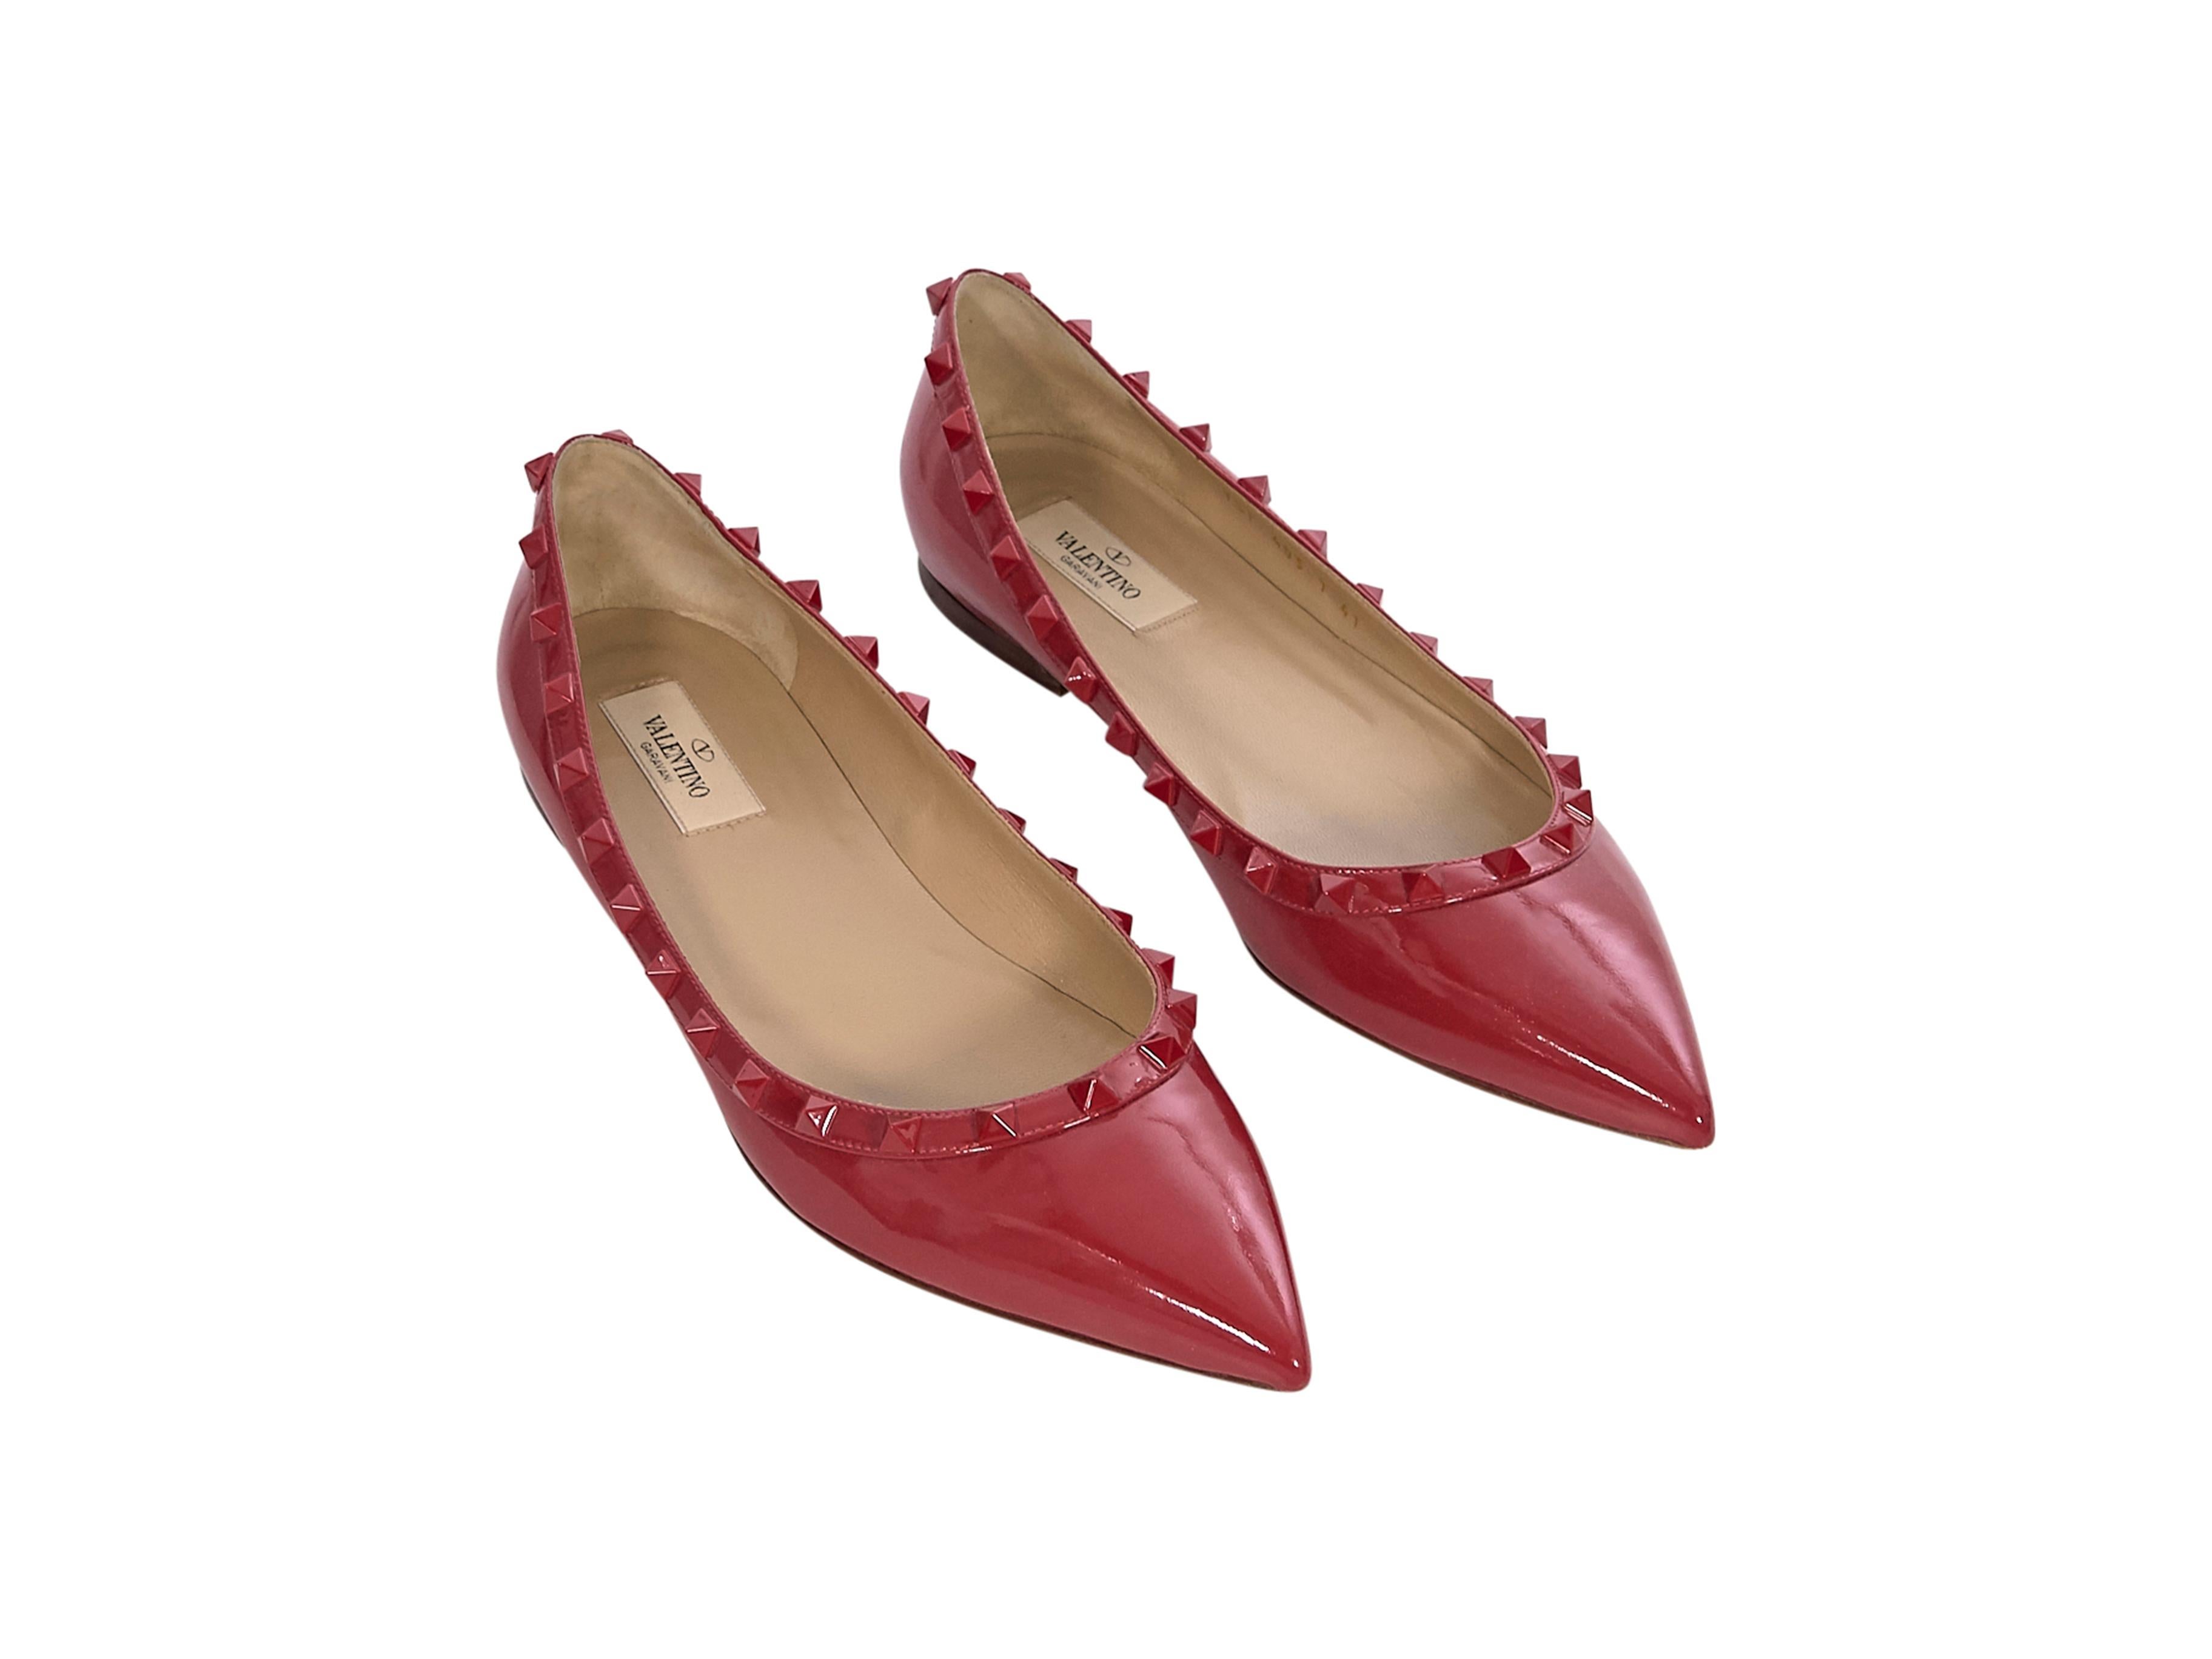 Product details: Red patent leather Rockstud flats by Valentino. Tonal stud-embellishments. Pointed-toe. Slip-on style. Brand size FR 41. Style with floral-patterned shorts. 